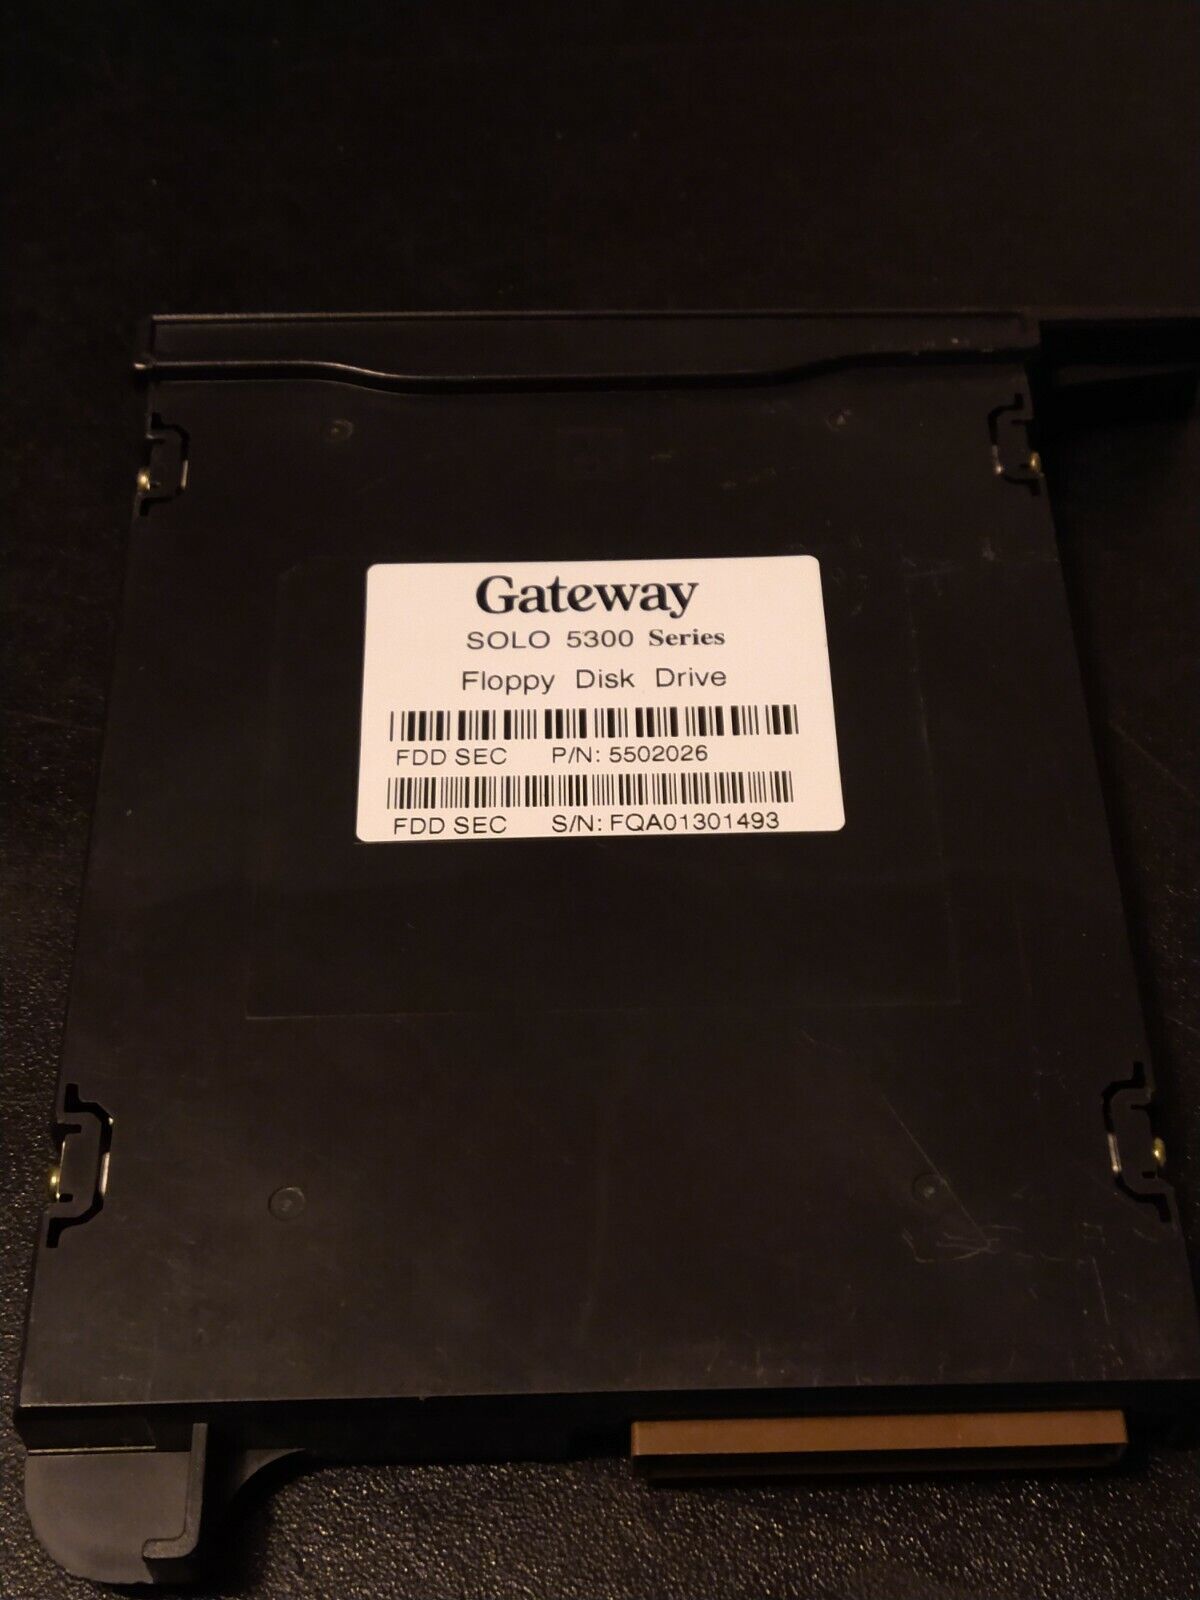 Gateway 5502026 Floppy Disk Drive for Solo 5300 Series Laptops - $26.72